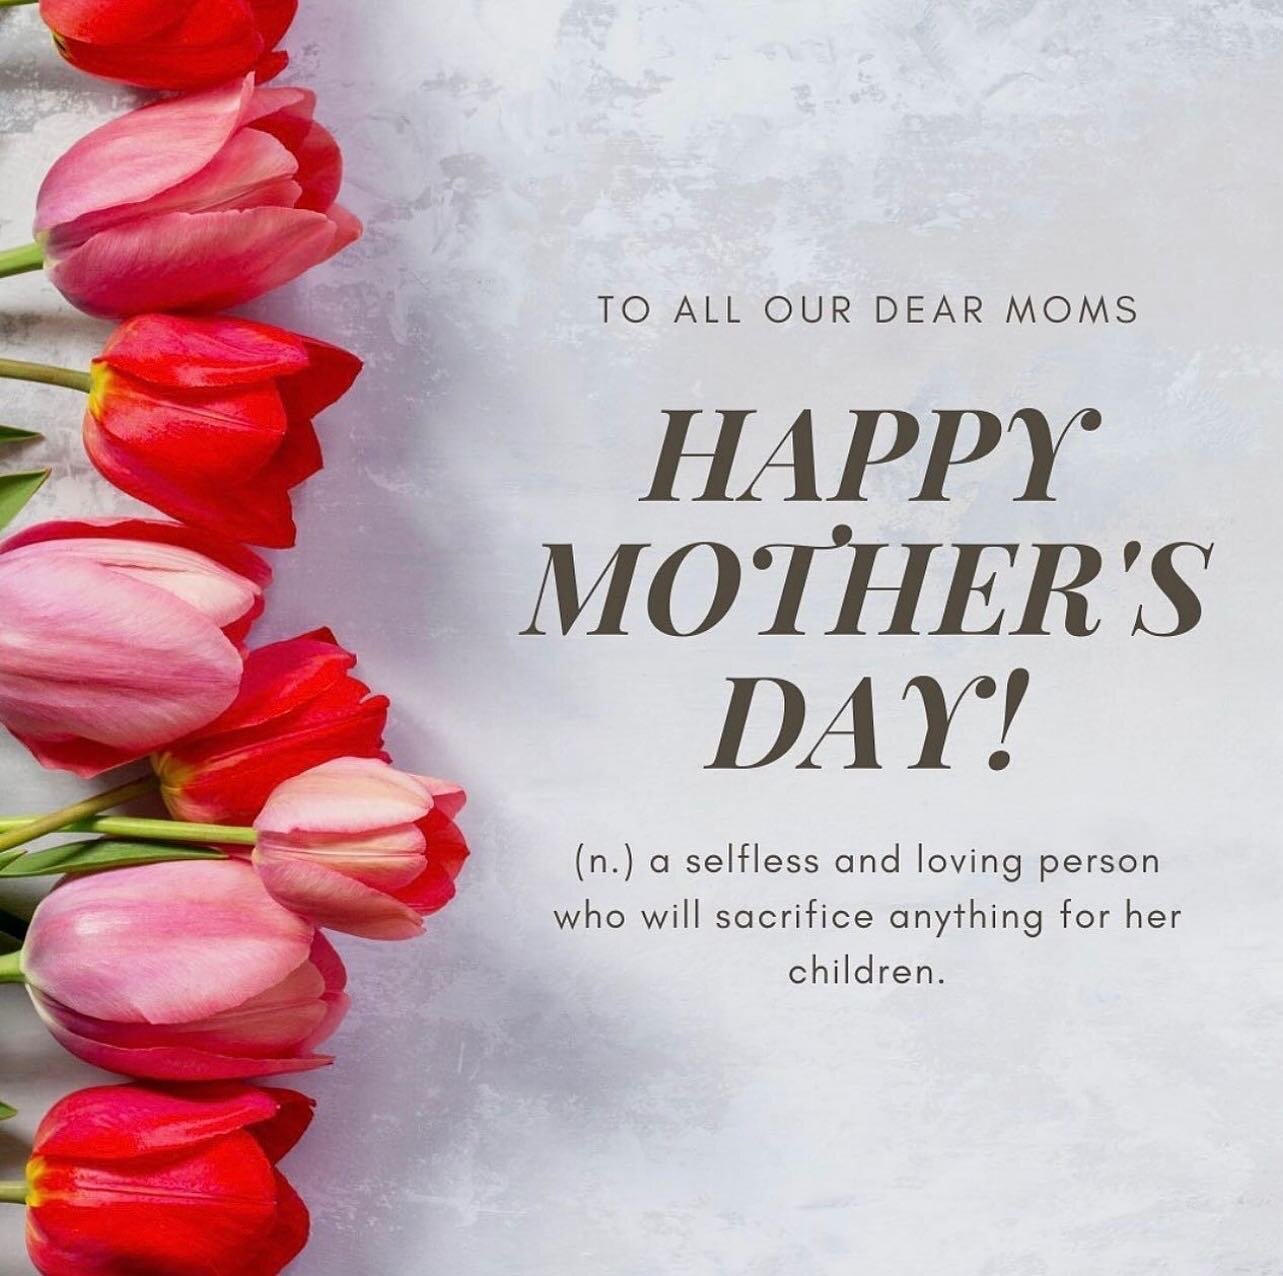 Happy Mother&rsquo;s Day to our Cathedral Community! 💗

&ldquo;Please bless her, Lord, and comfort her. Help her loving heart to continue to love and give of herself to others. Strengthen her when she is down and give her hope when she is discourage